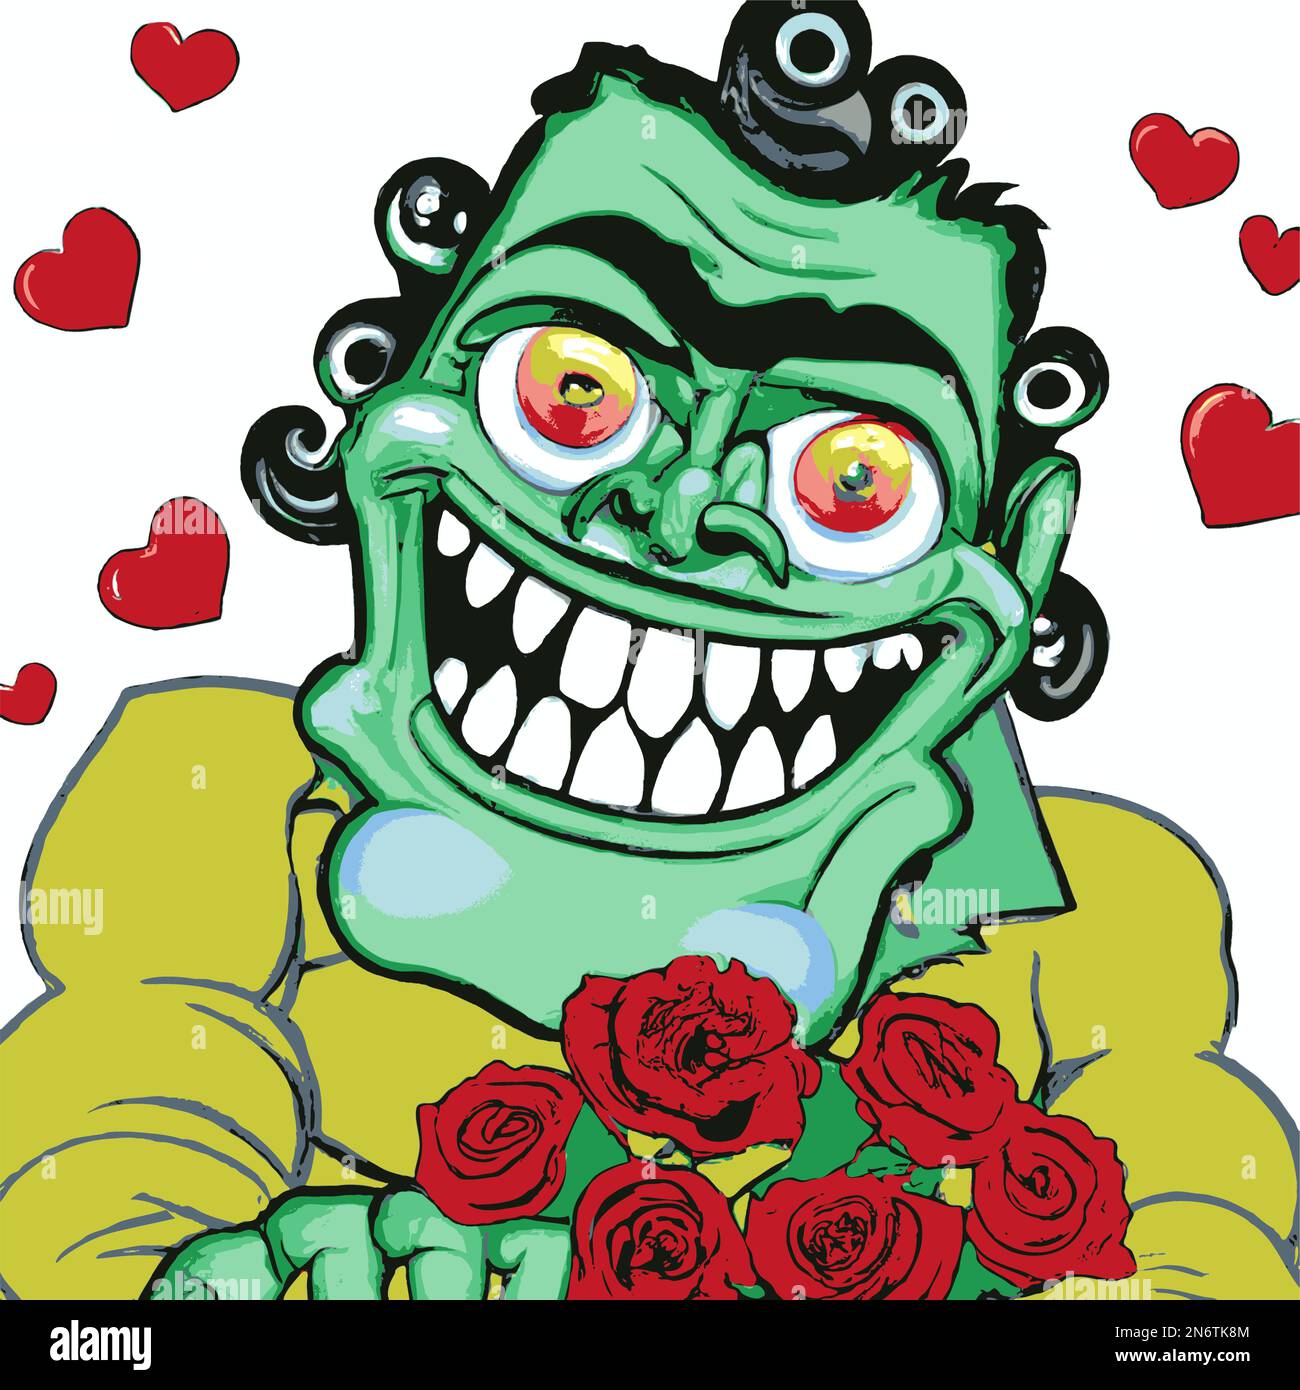 Green monster smiling with roses, hearts in the background Stock Vector